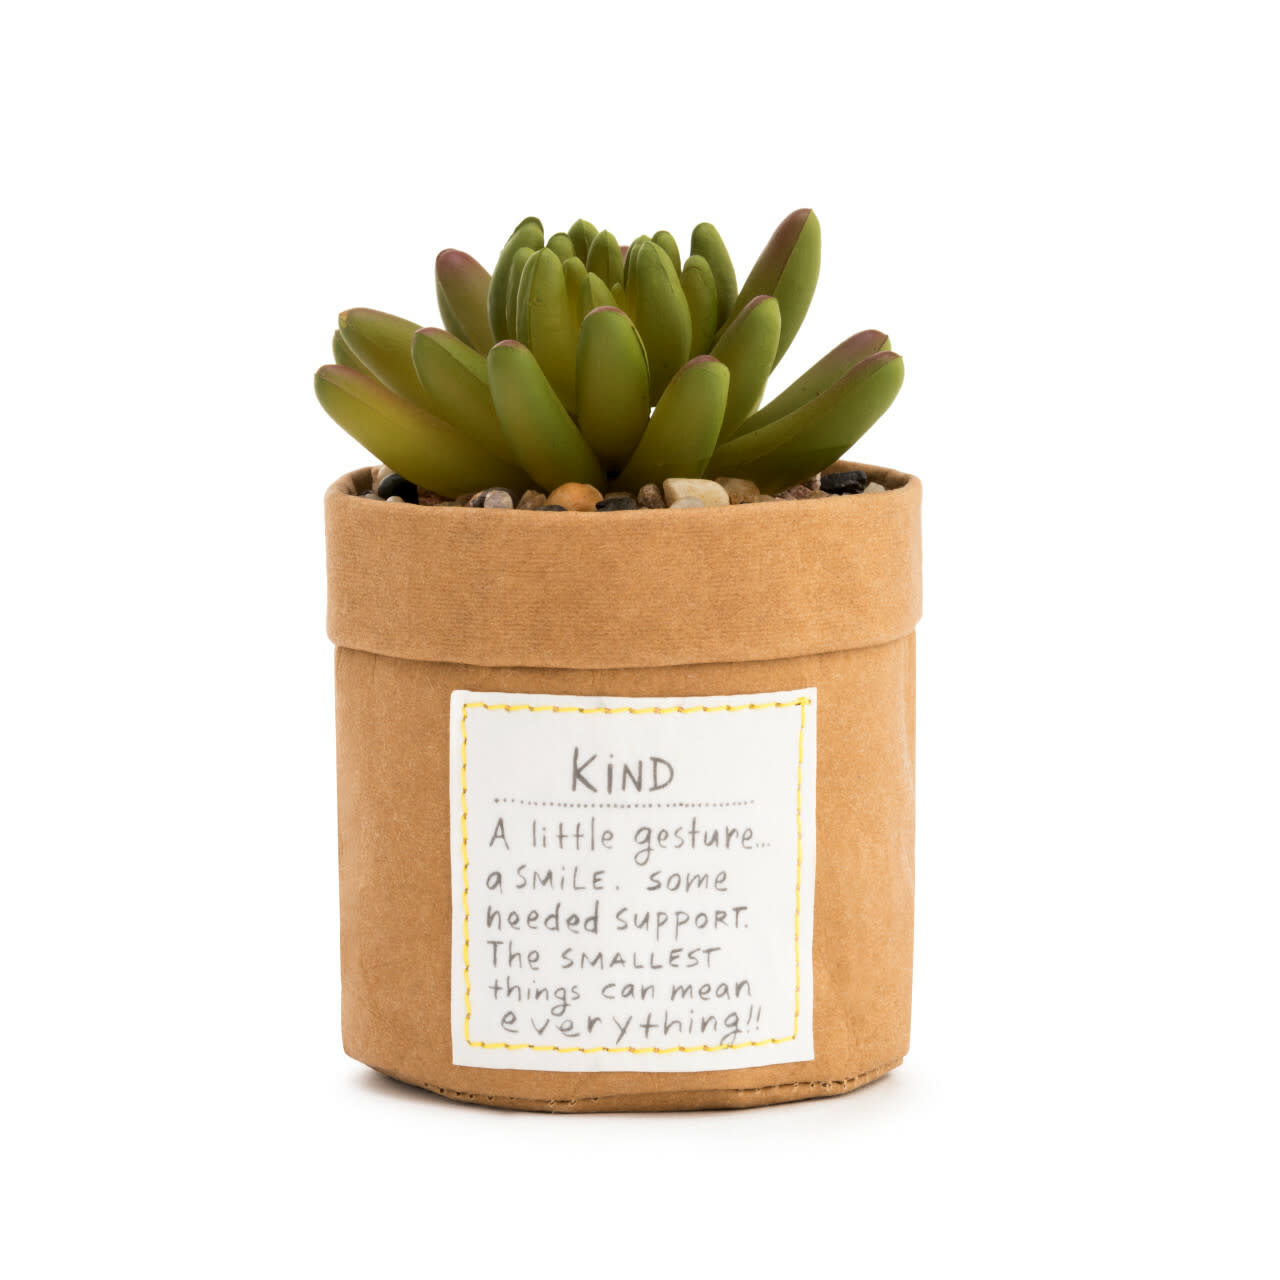 available at m. lynne designs Plant Kindness Succulent, Kind